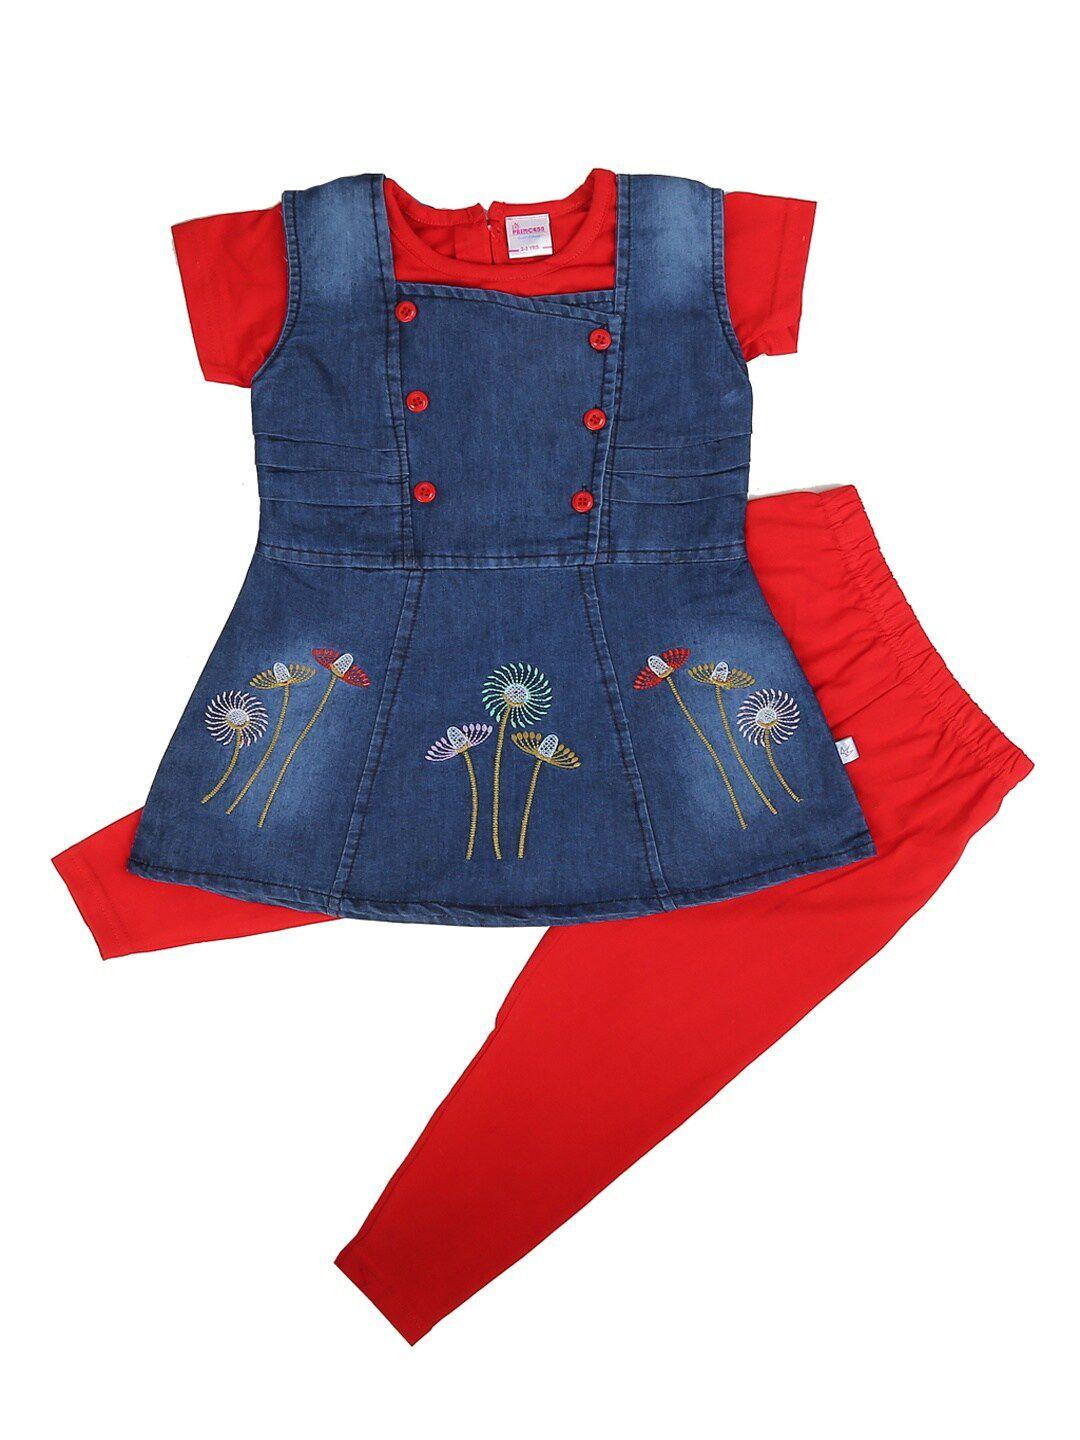 v-mart-unisex-kids-red-&-blue-printed-pure-cotton-top-with-leggings